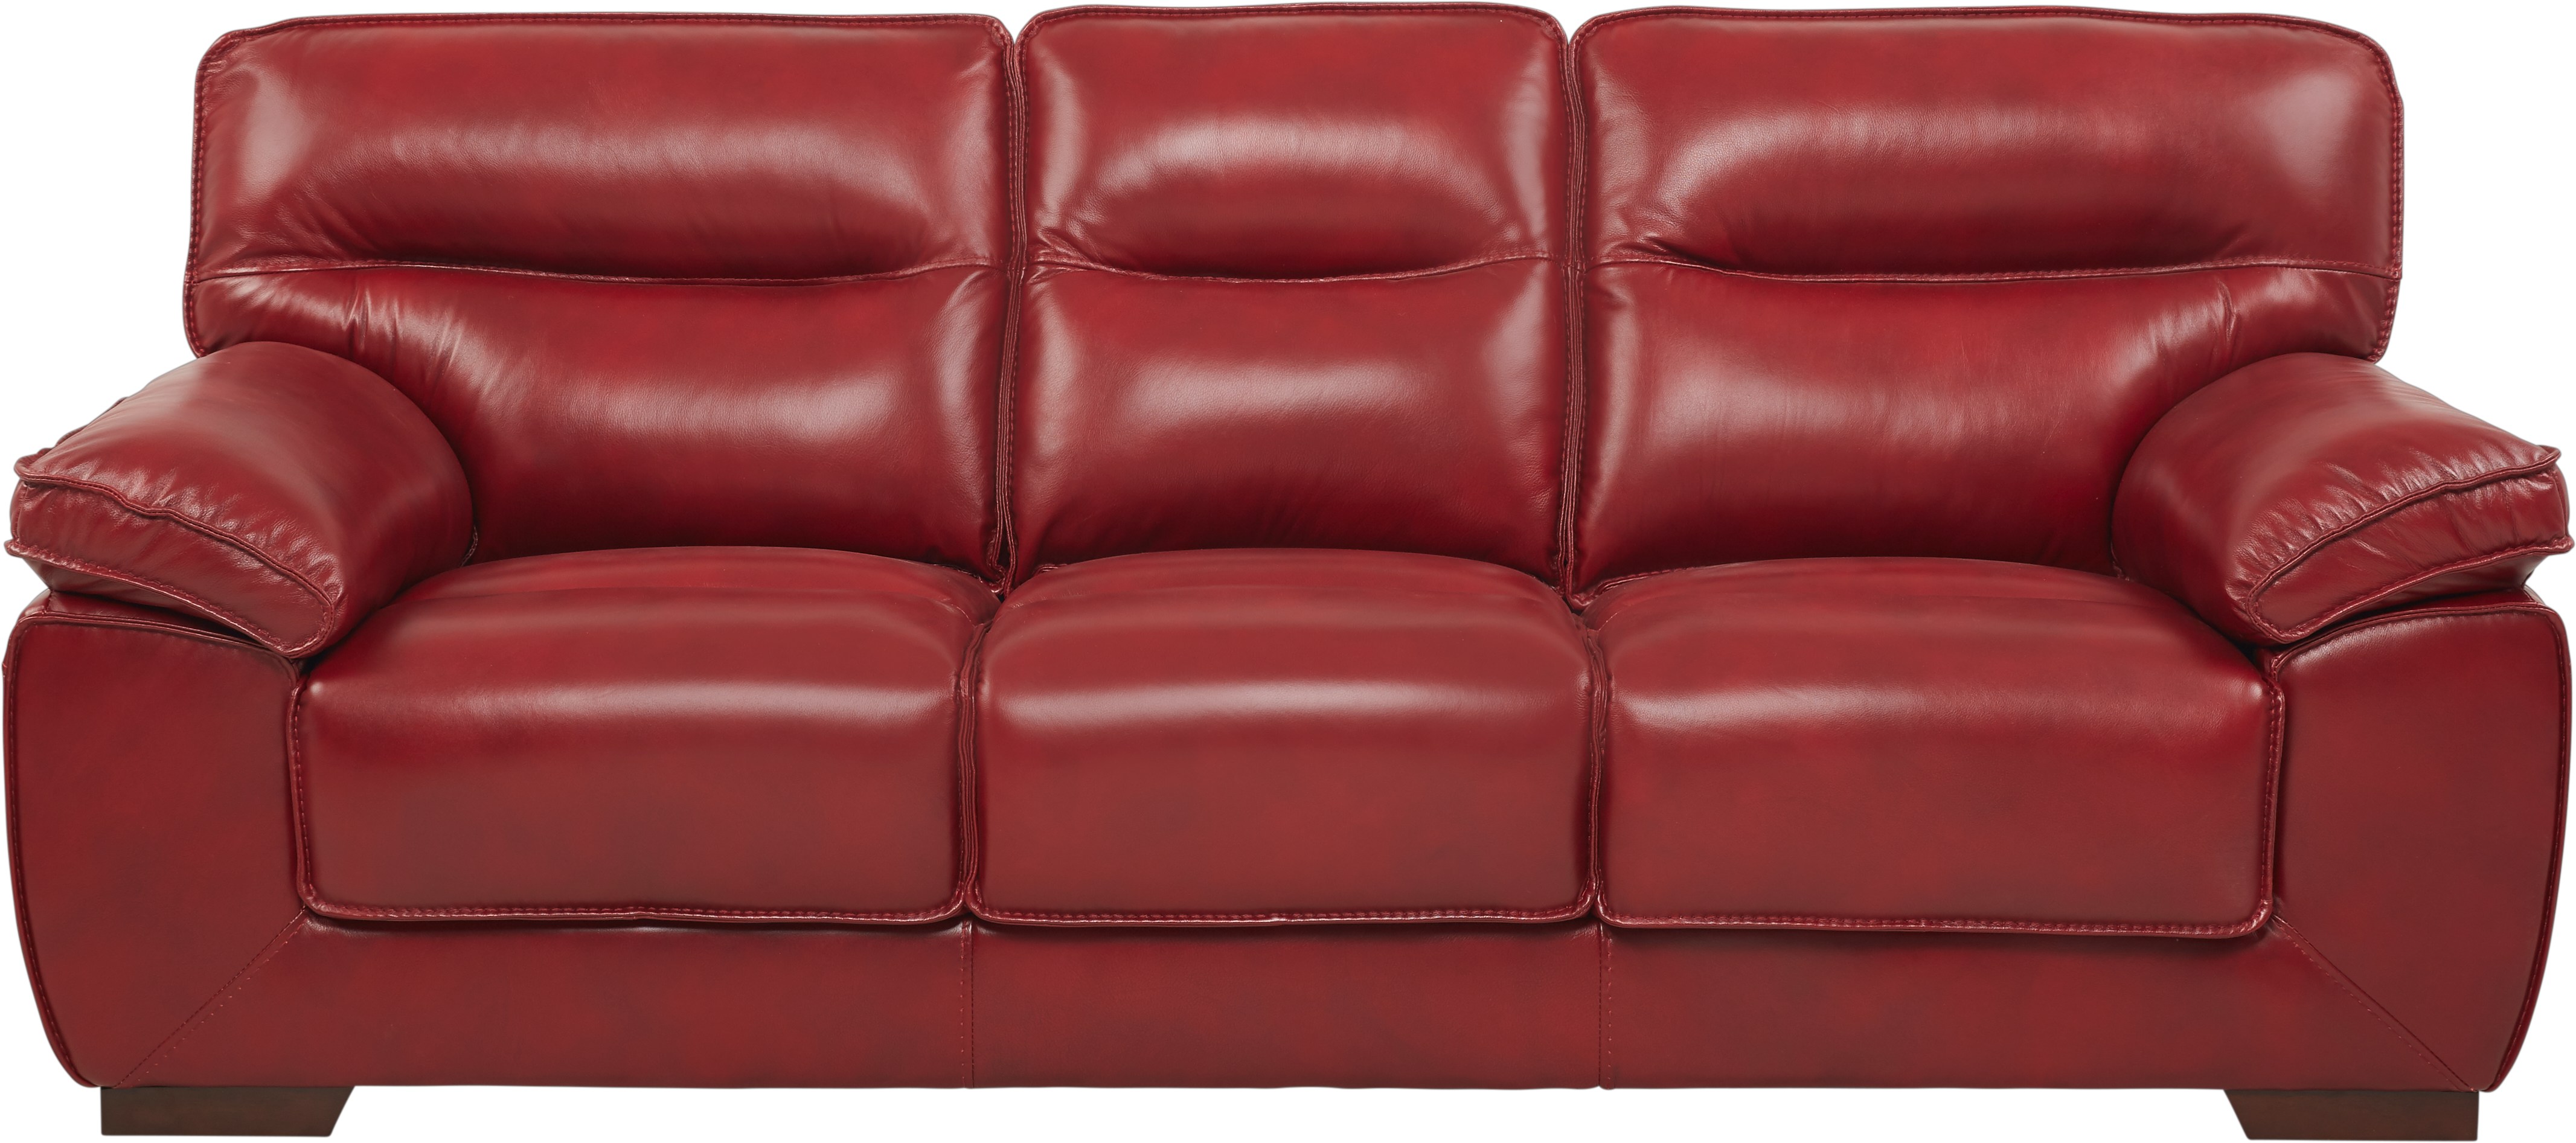 red leather sofa scan design